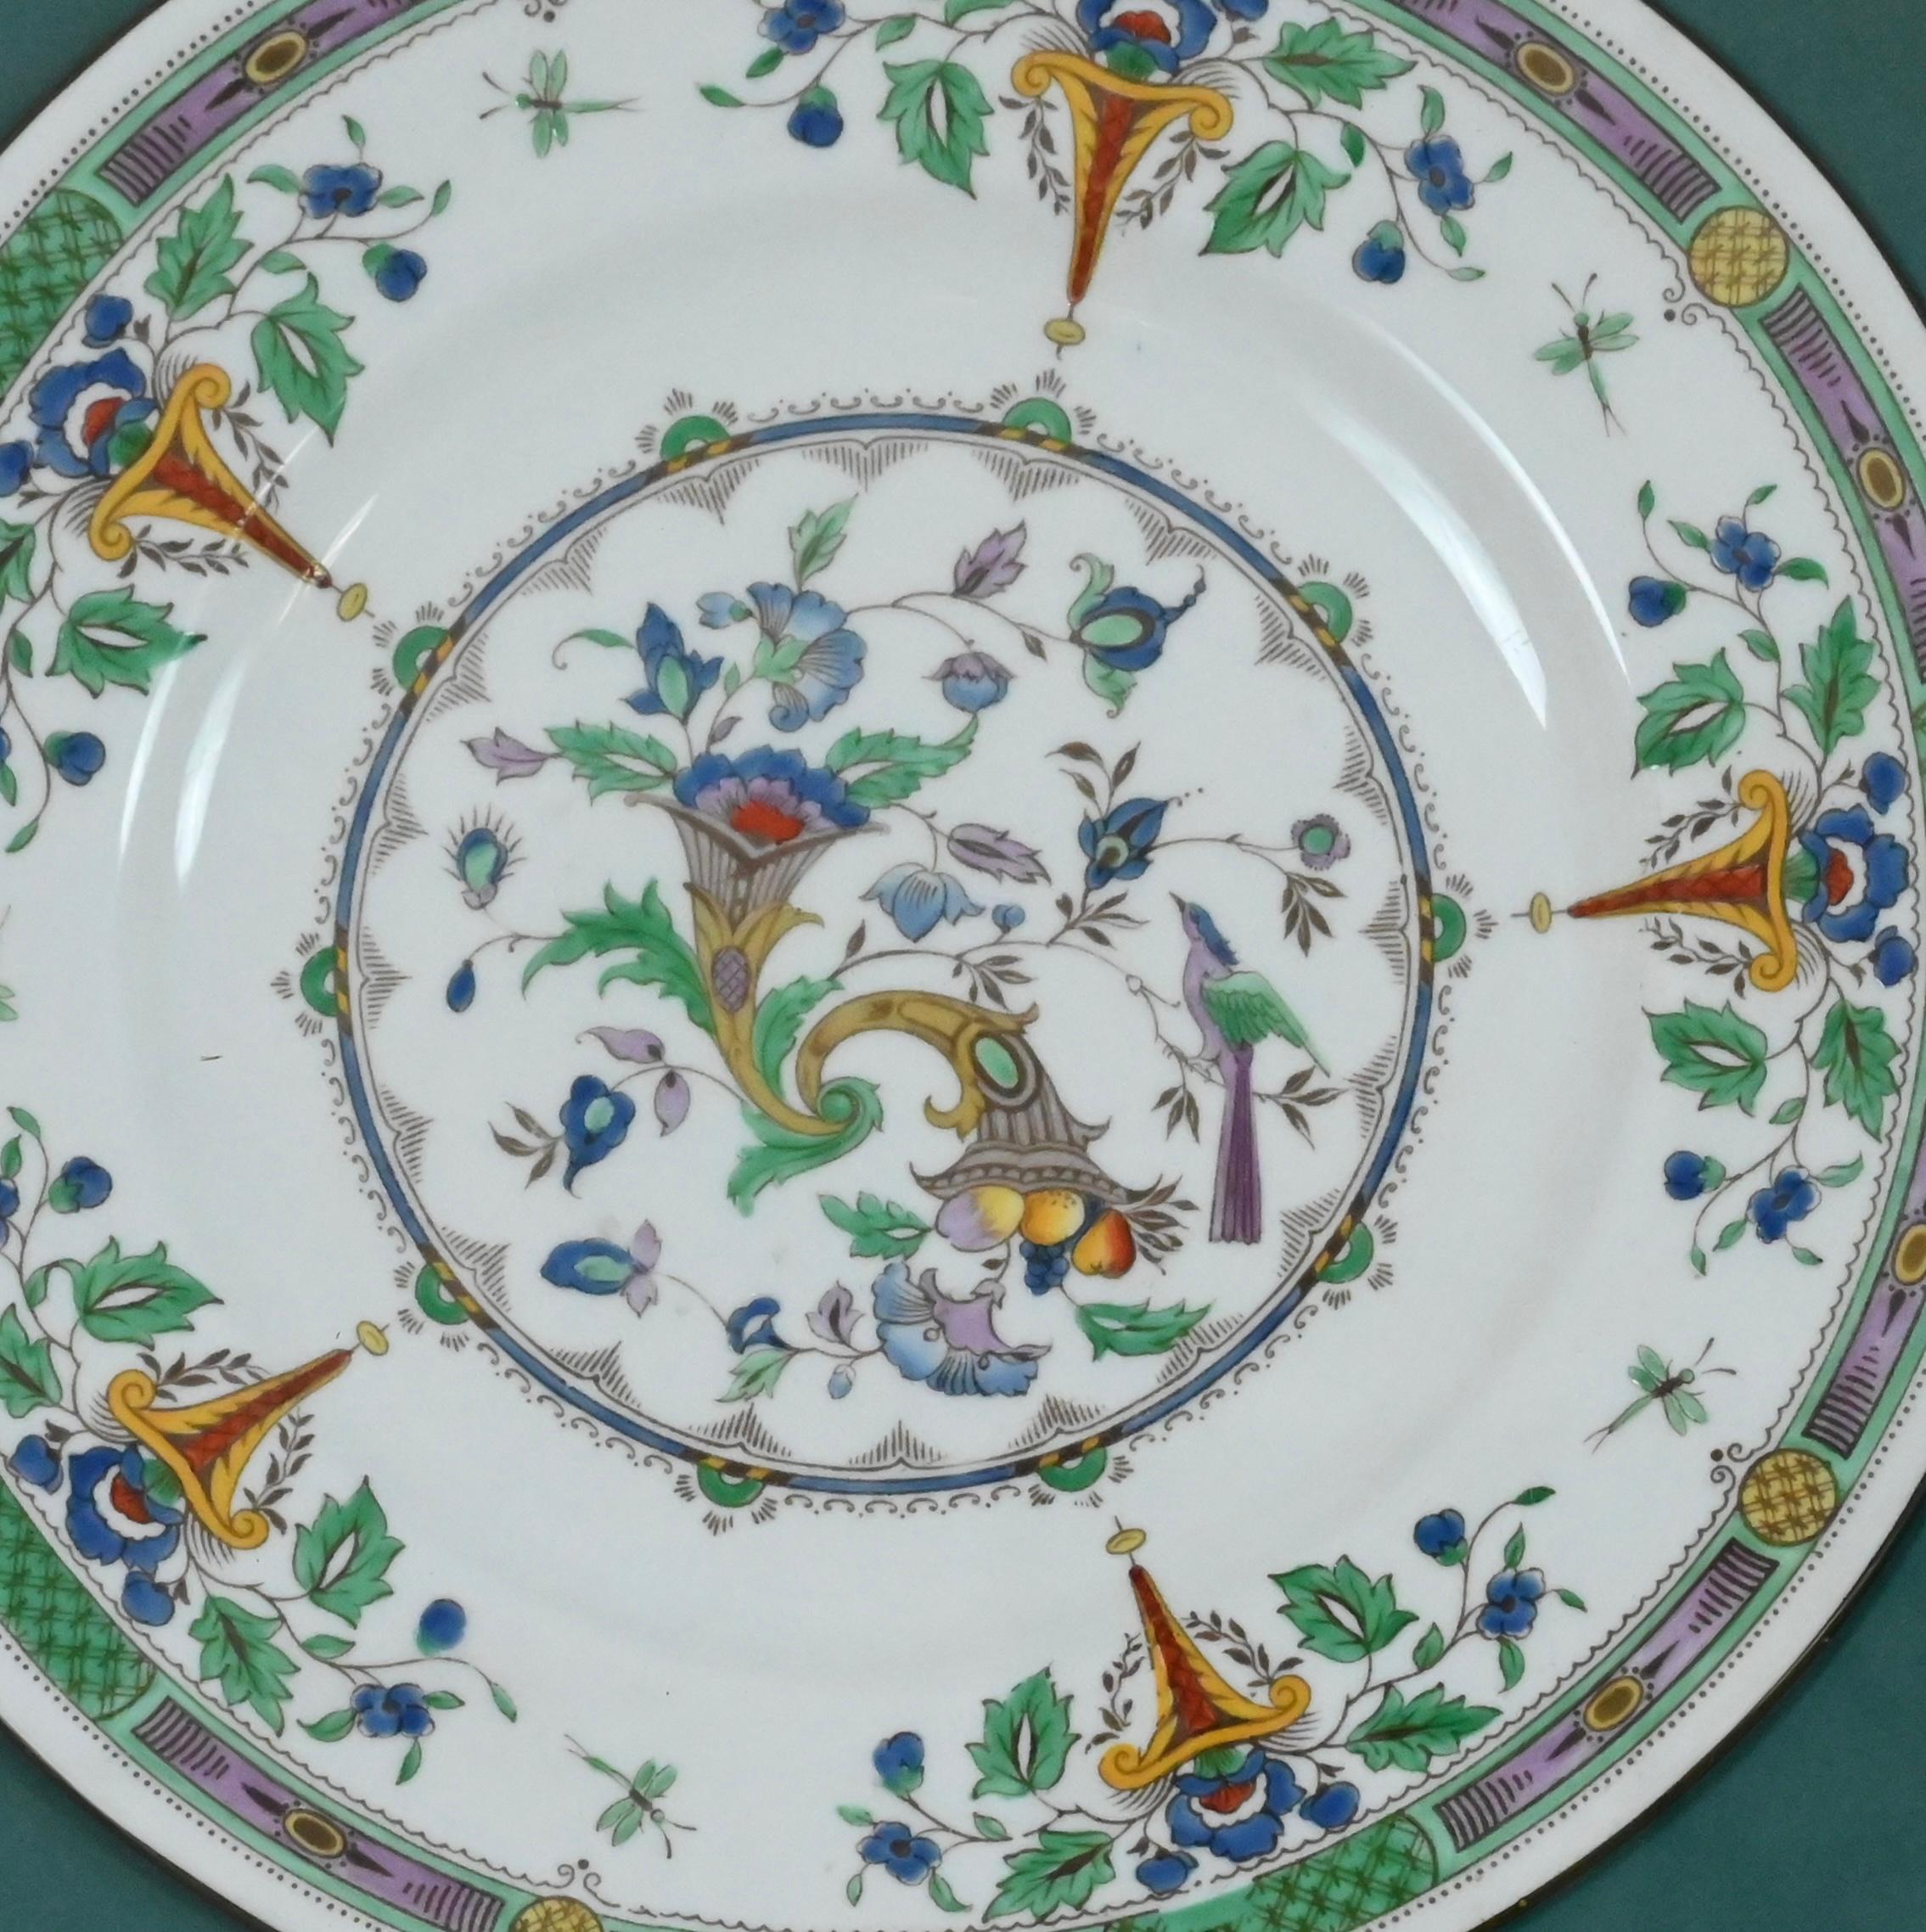 A fine Wedgwood colorful and elegant porcelain dish, charger or plate.  Hand-crafted and hand-painted by following the original Renaissance painting technique, unchanged over time which you can see on each plate, contributes to the craftsmanship of